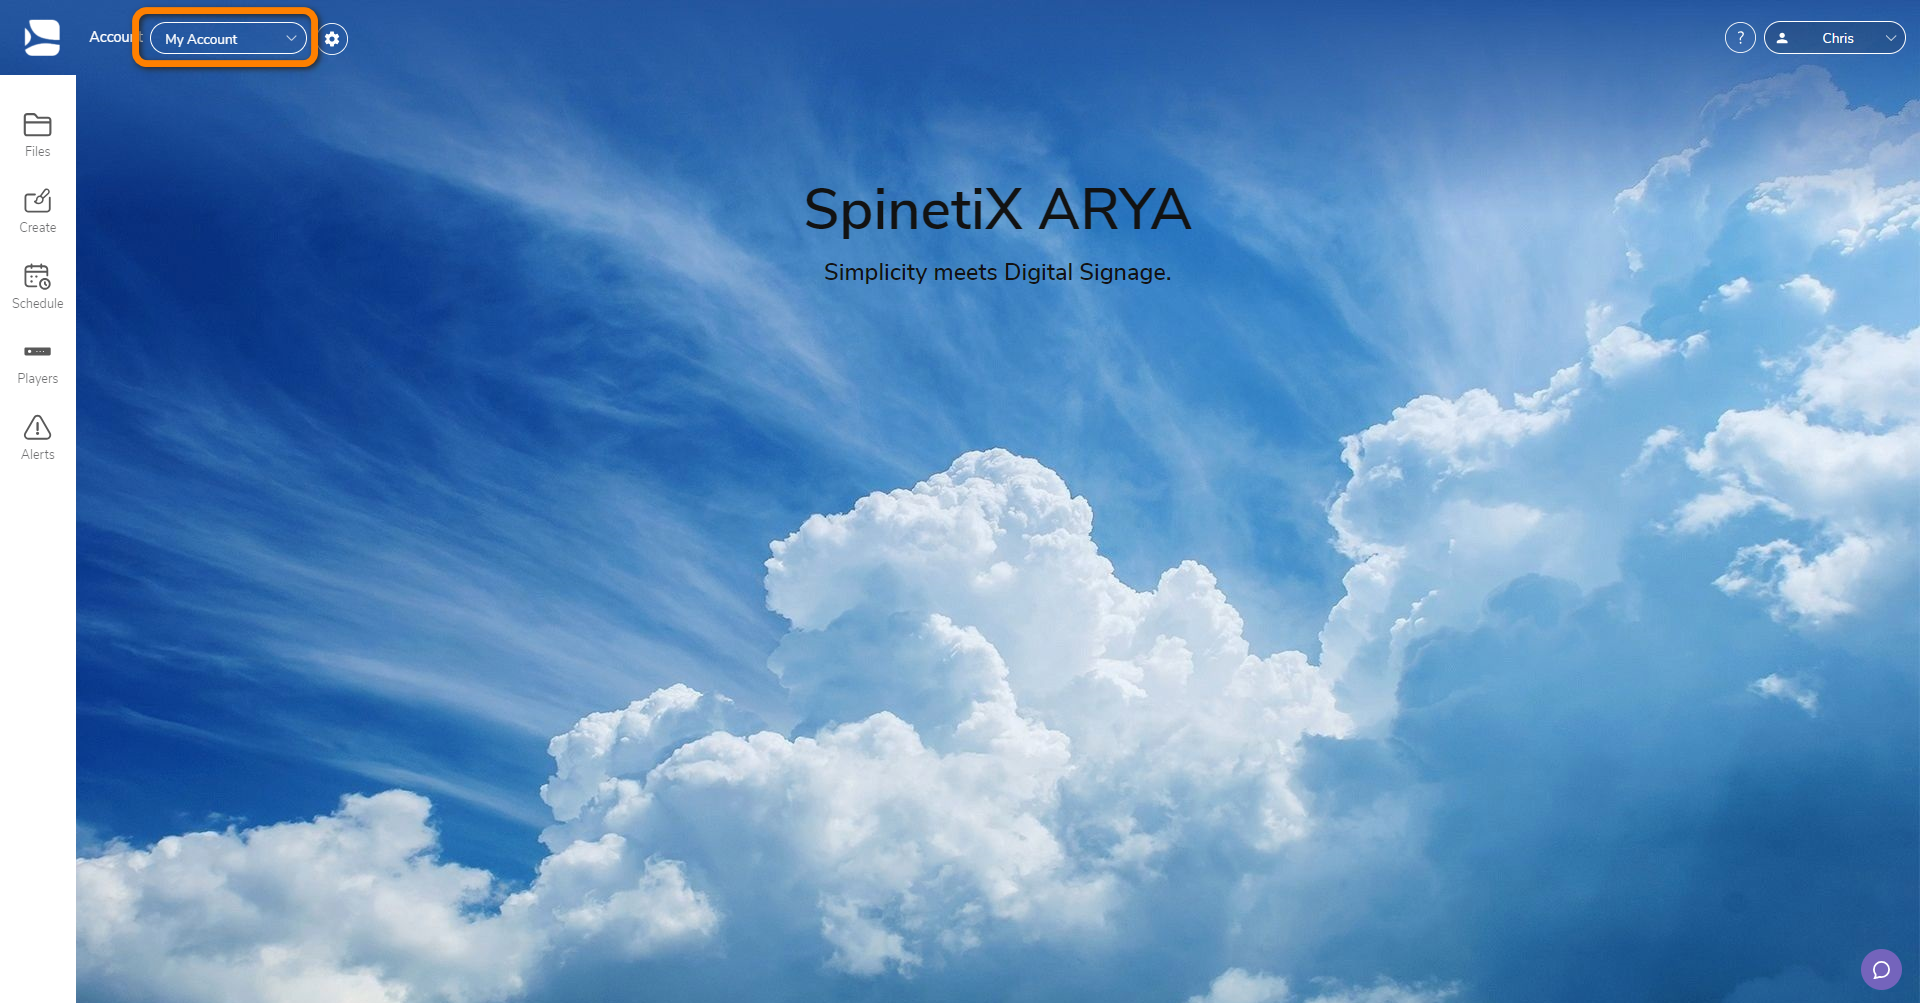 spinetix-arya-main-screen-with-accounts-button-marked.png